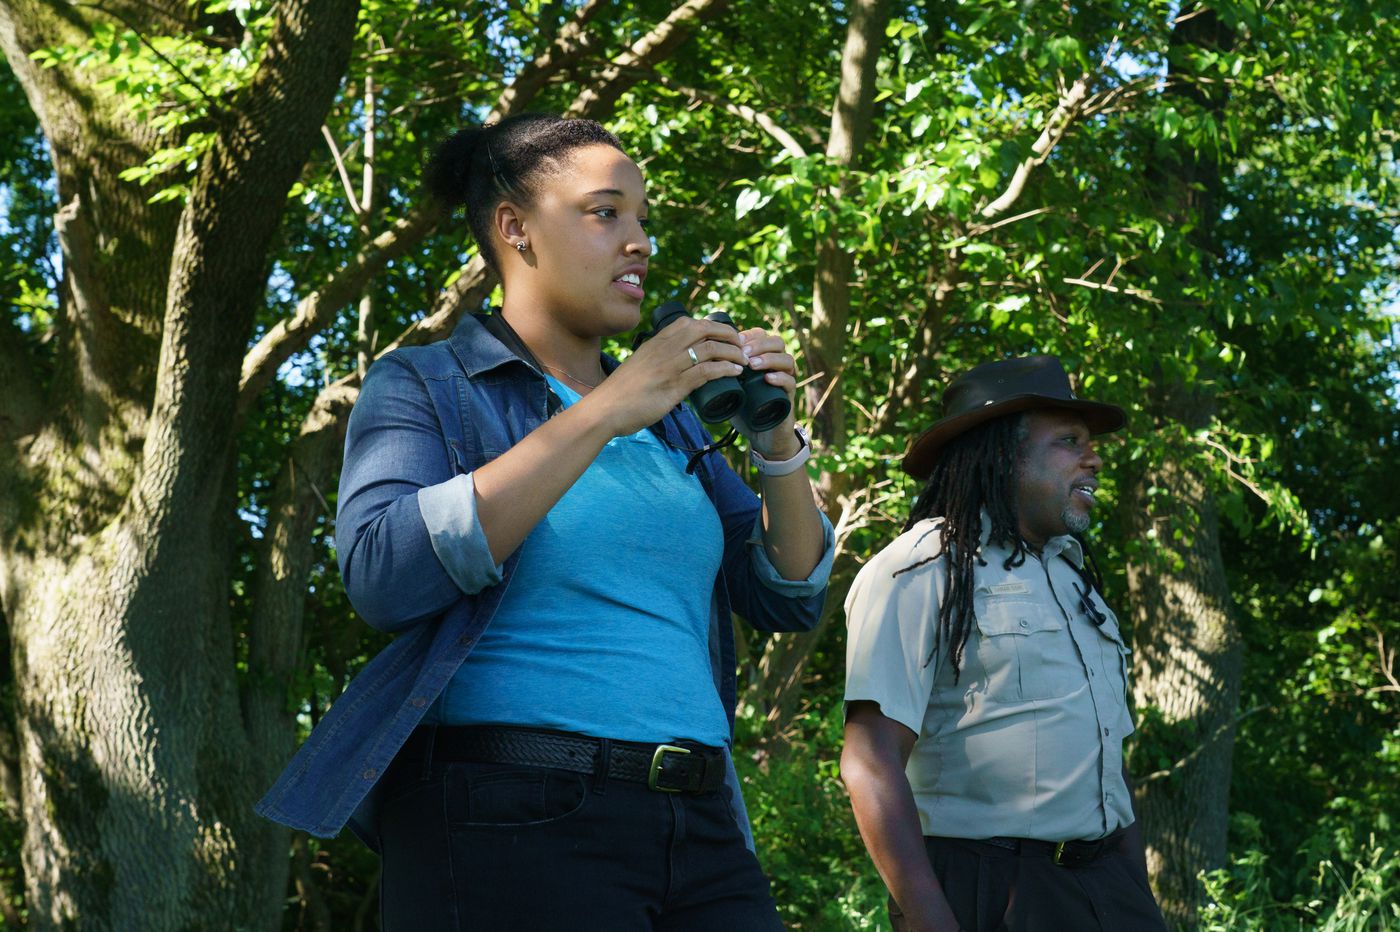 A woman and a man, both U.S. Fish and Wildlife Service employees, look for birds in the woods. The woman holds binoculars.